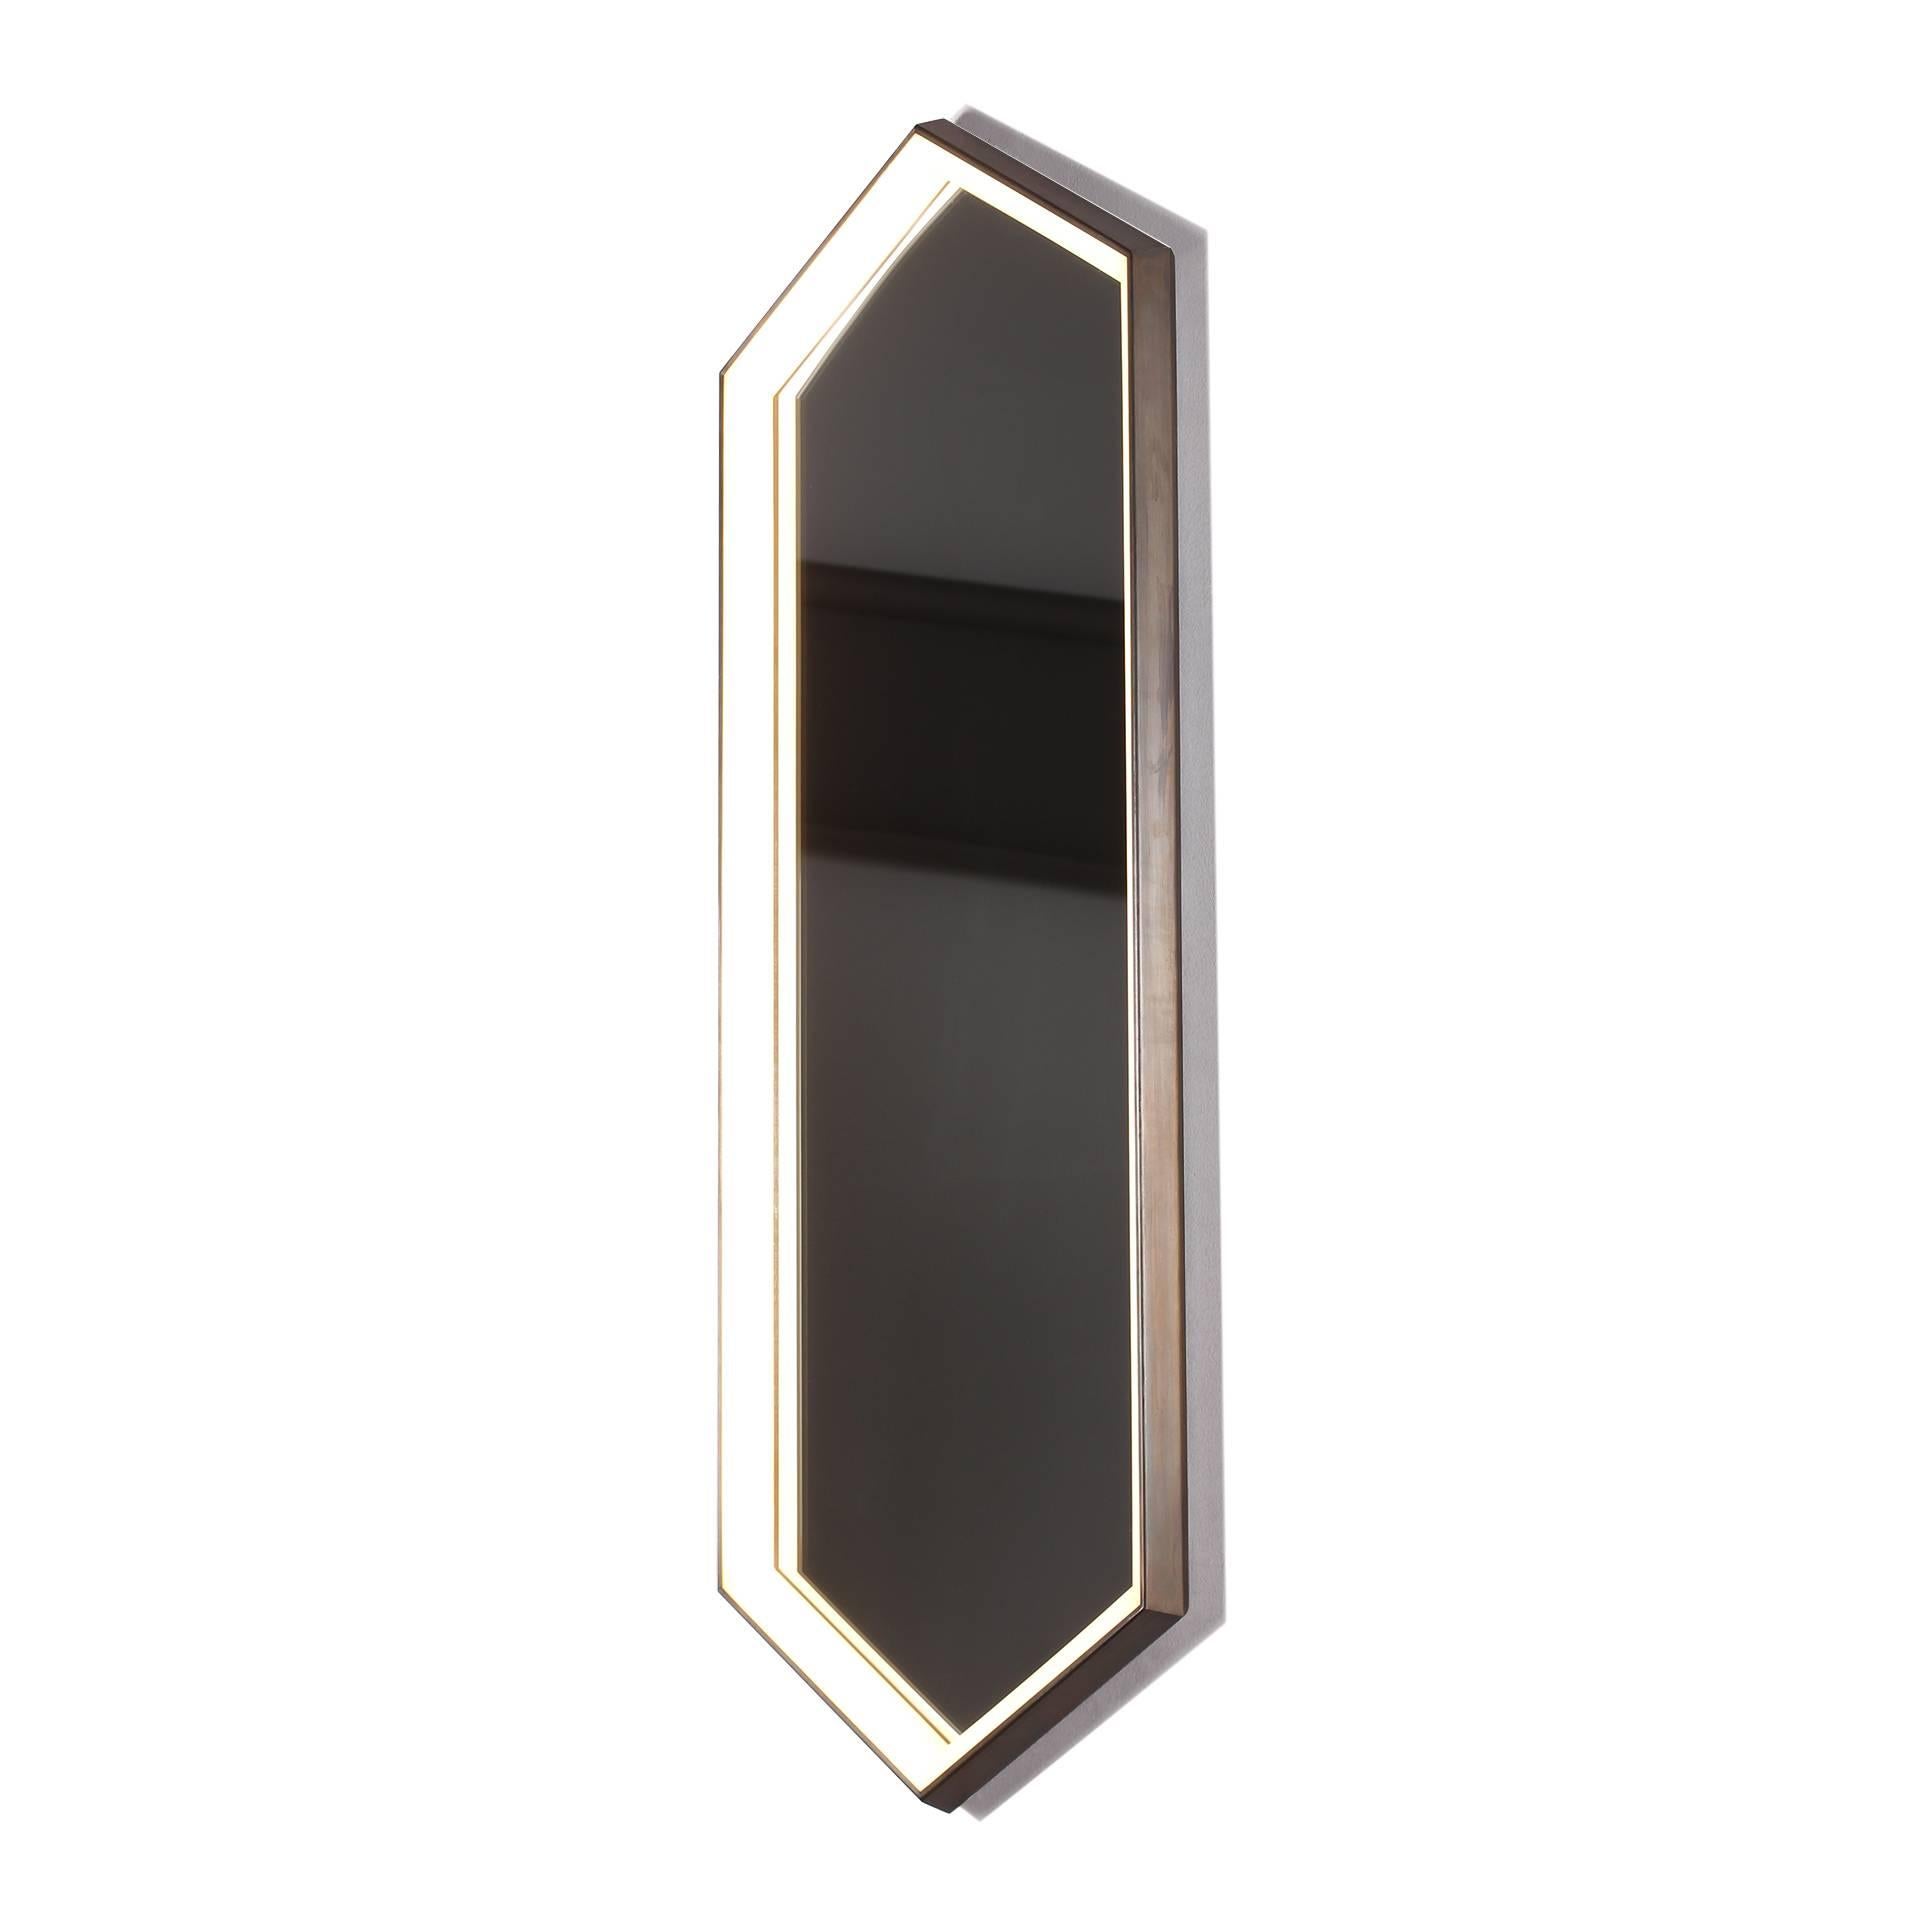 KRUOS Mirror beautifully combines a sconce and mirror into one piece, placing light where it is most needed. The edge-lit hexagonal form completely illuminates from all sides, avoiding unwanted shadowing. KRUOS Mirror is also available in a wider